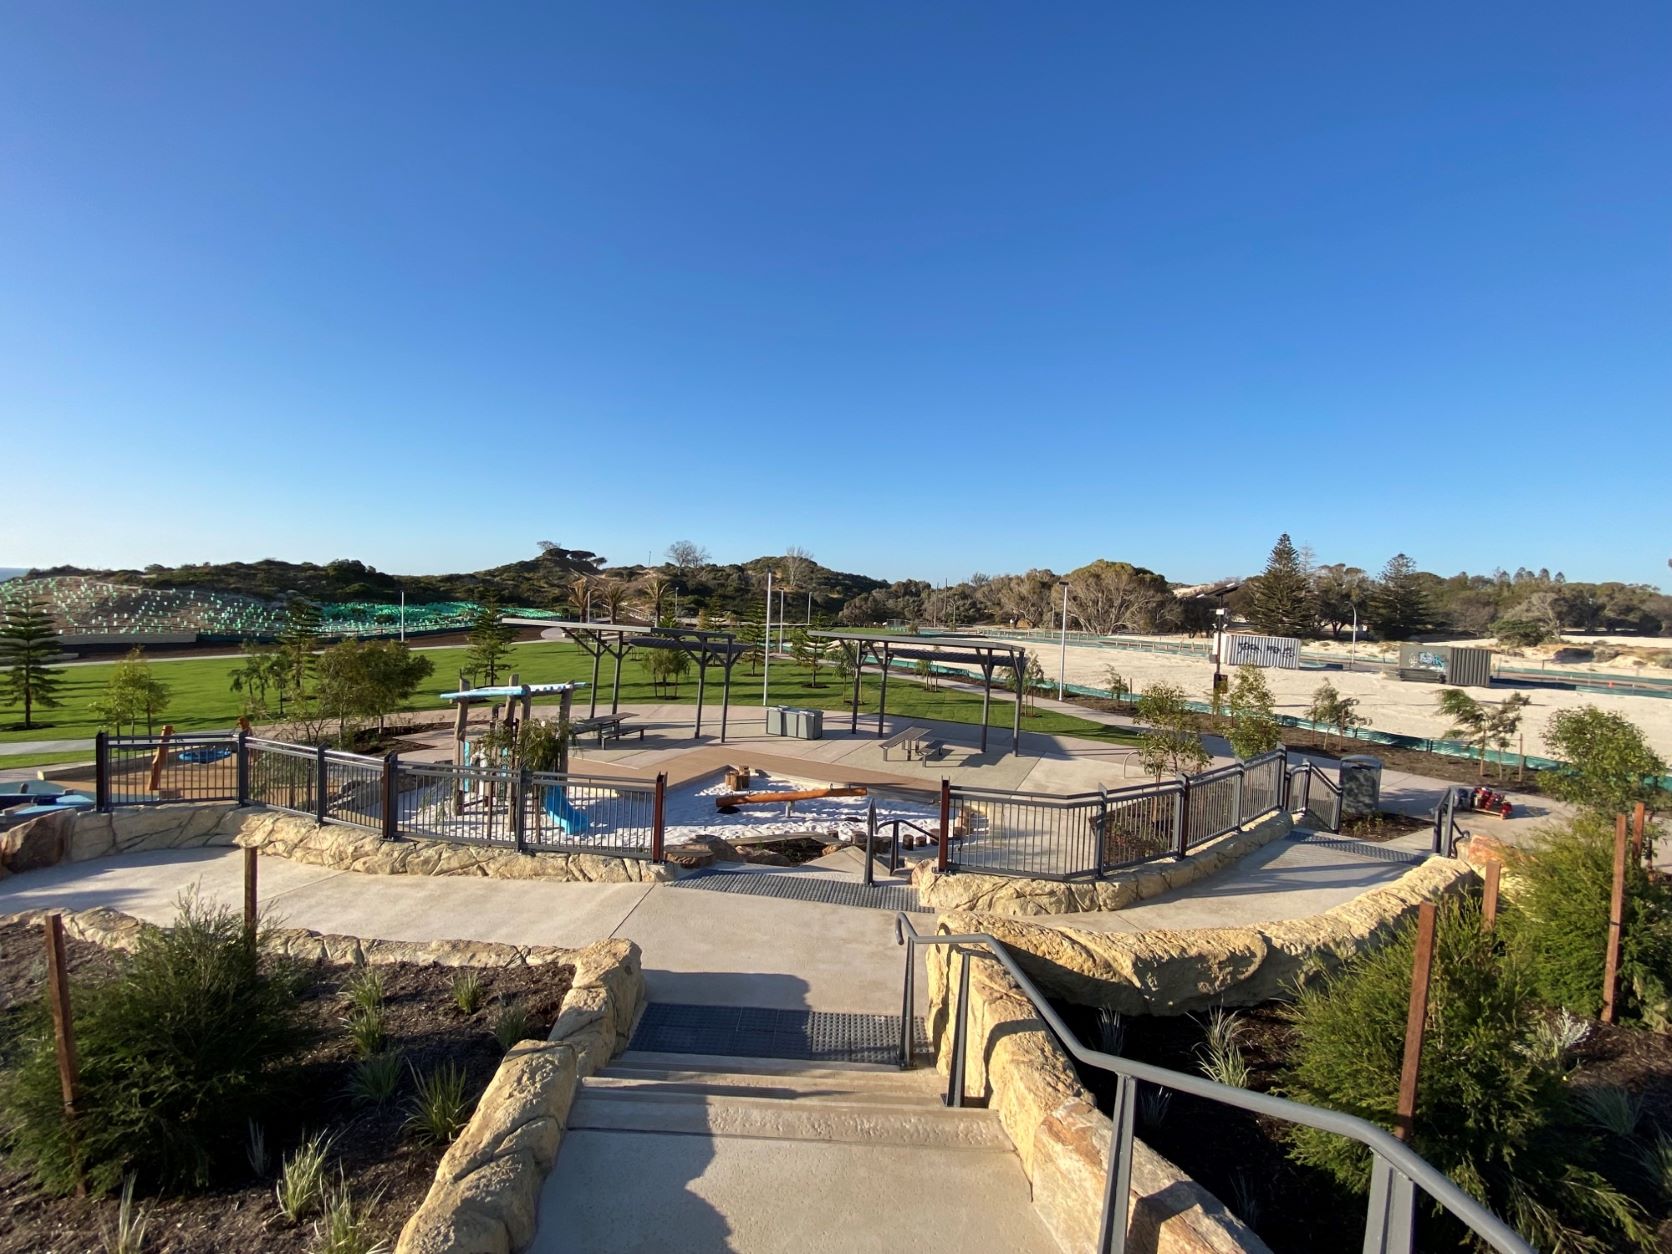 A spacious park with a big playground and vast grassy area, located at Capricorn Beach.